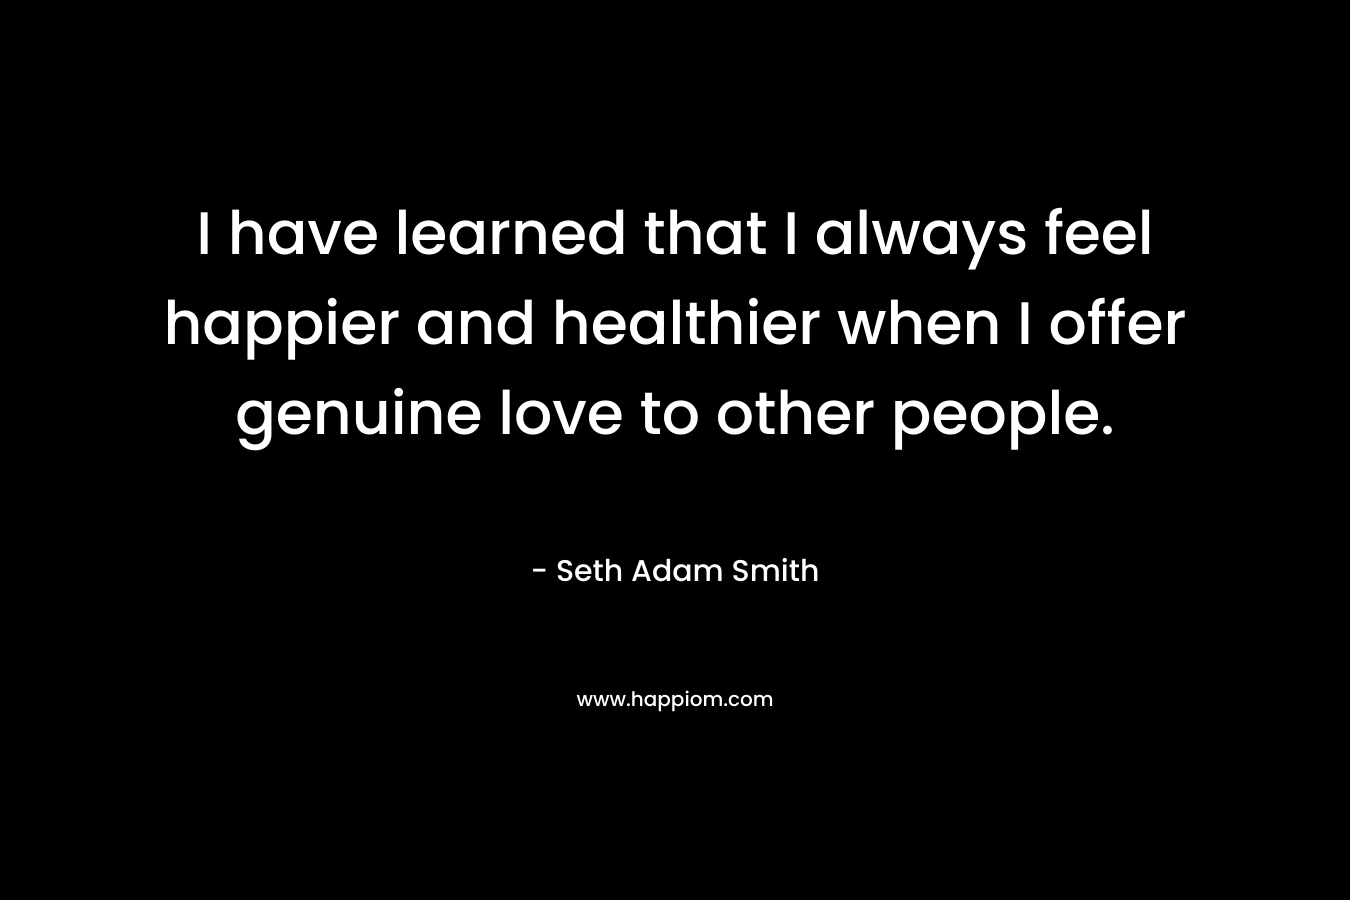 I have learned that I always feel happier and healthier when I offer genuine love to other people. – Seth Adam Smith